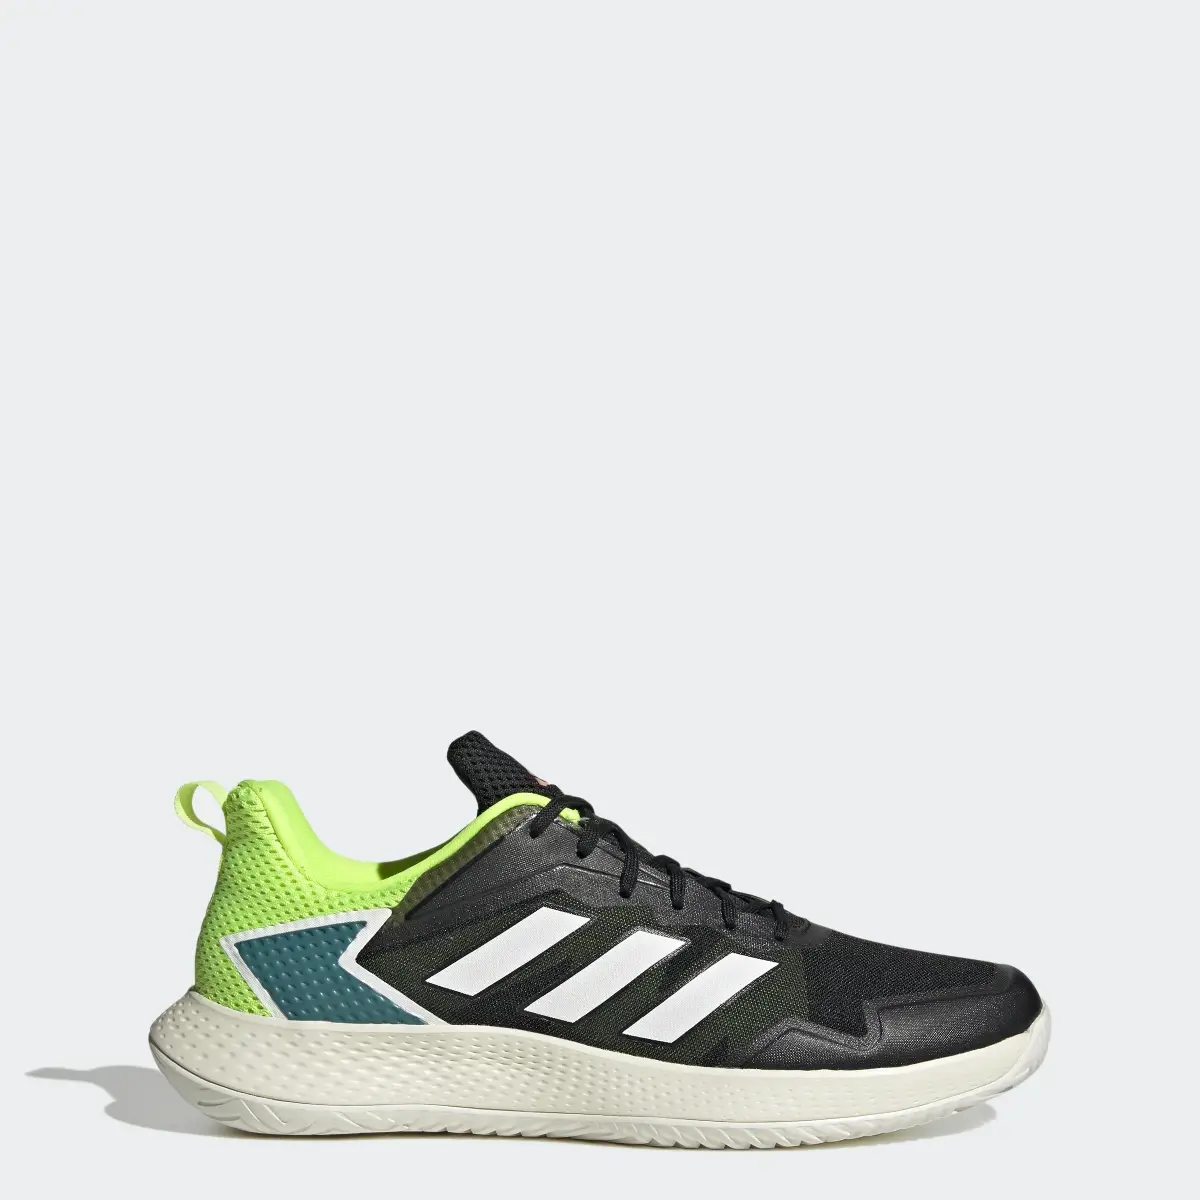 Adidas Defiant Speed Tennis Shoes. 1